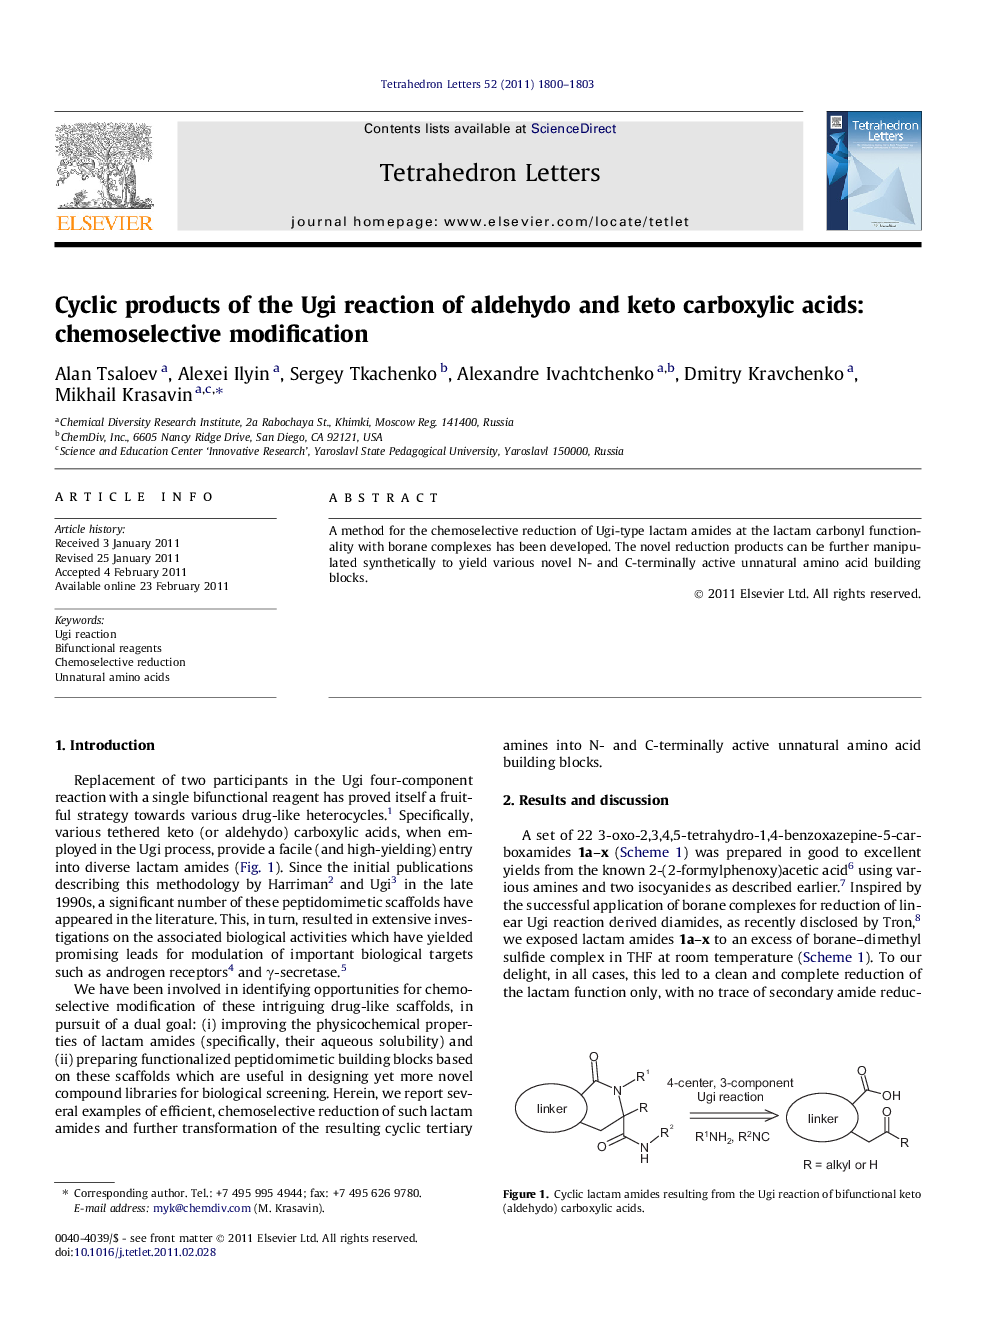 Cyclic products of the Ugi reaction of aldehydo and keto carboxylic acids: chemoselective modification